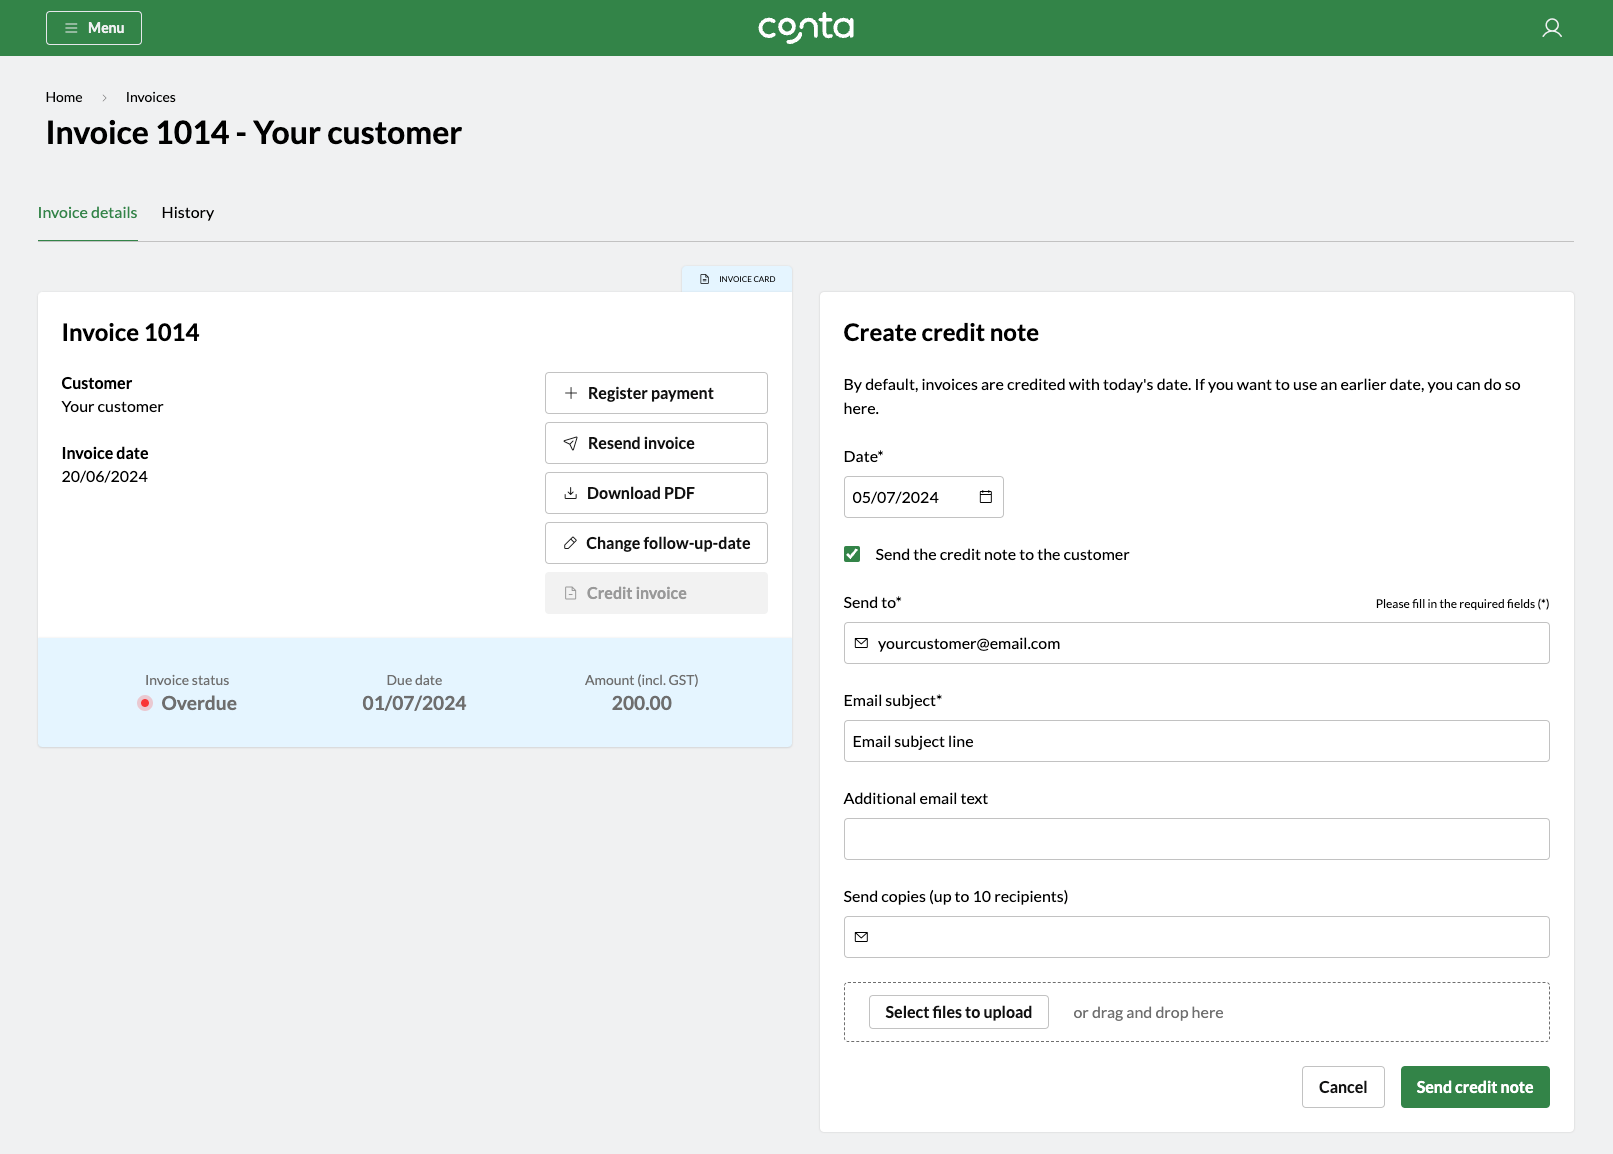 The invoice view in Conta, where you can create and send a credit note.